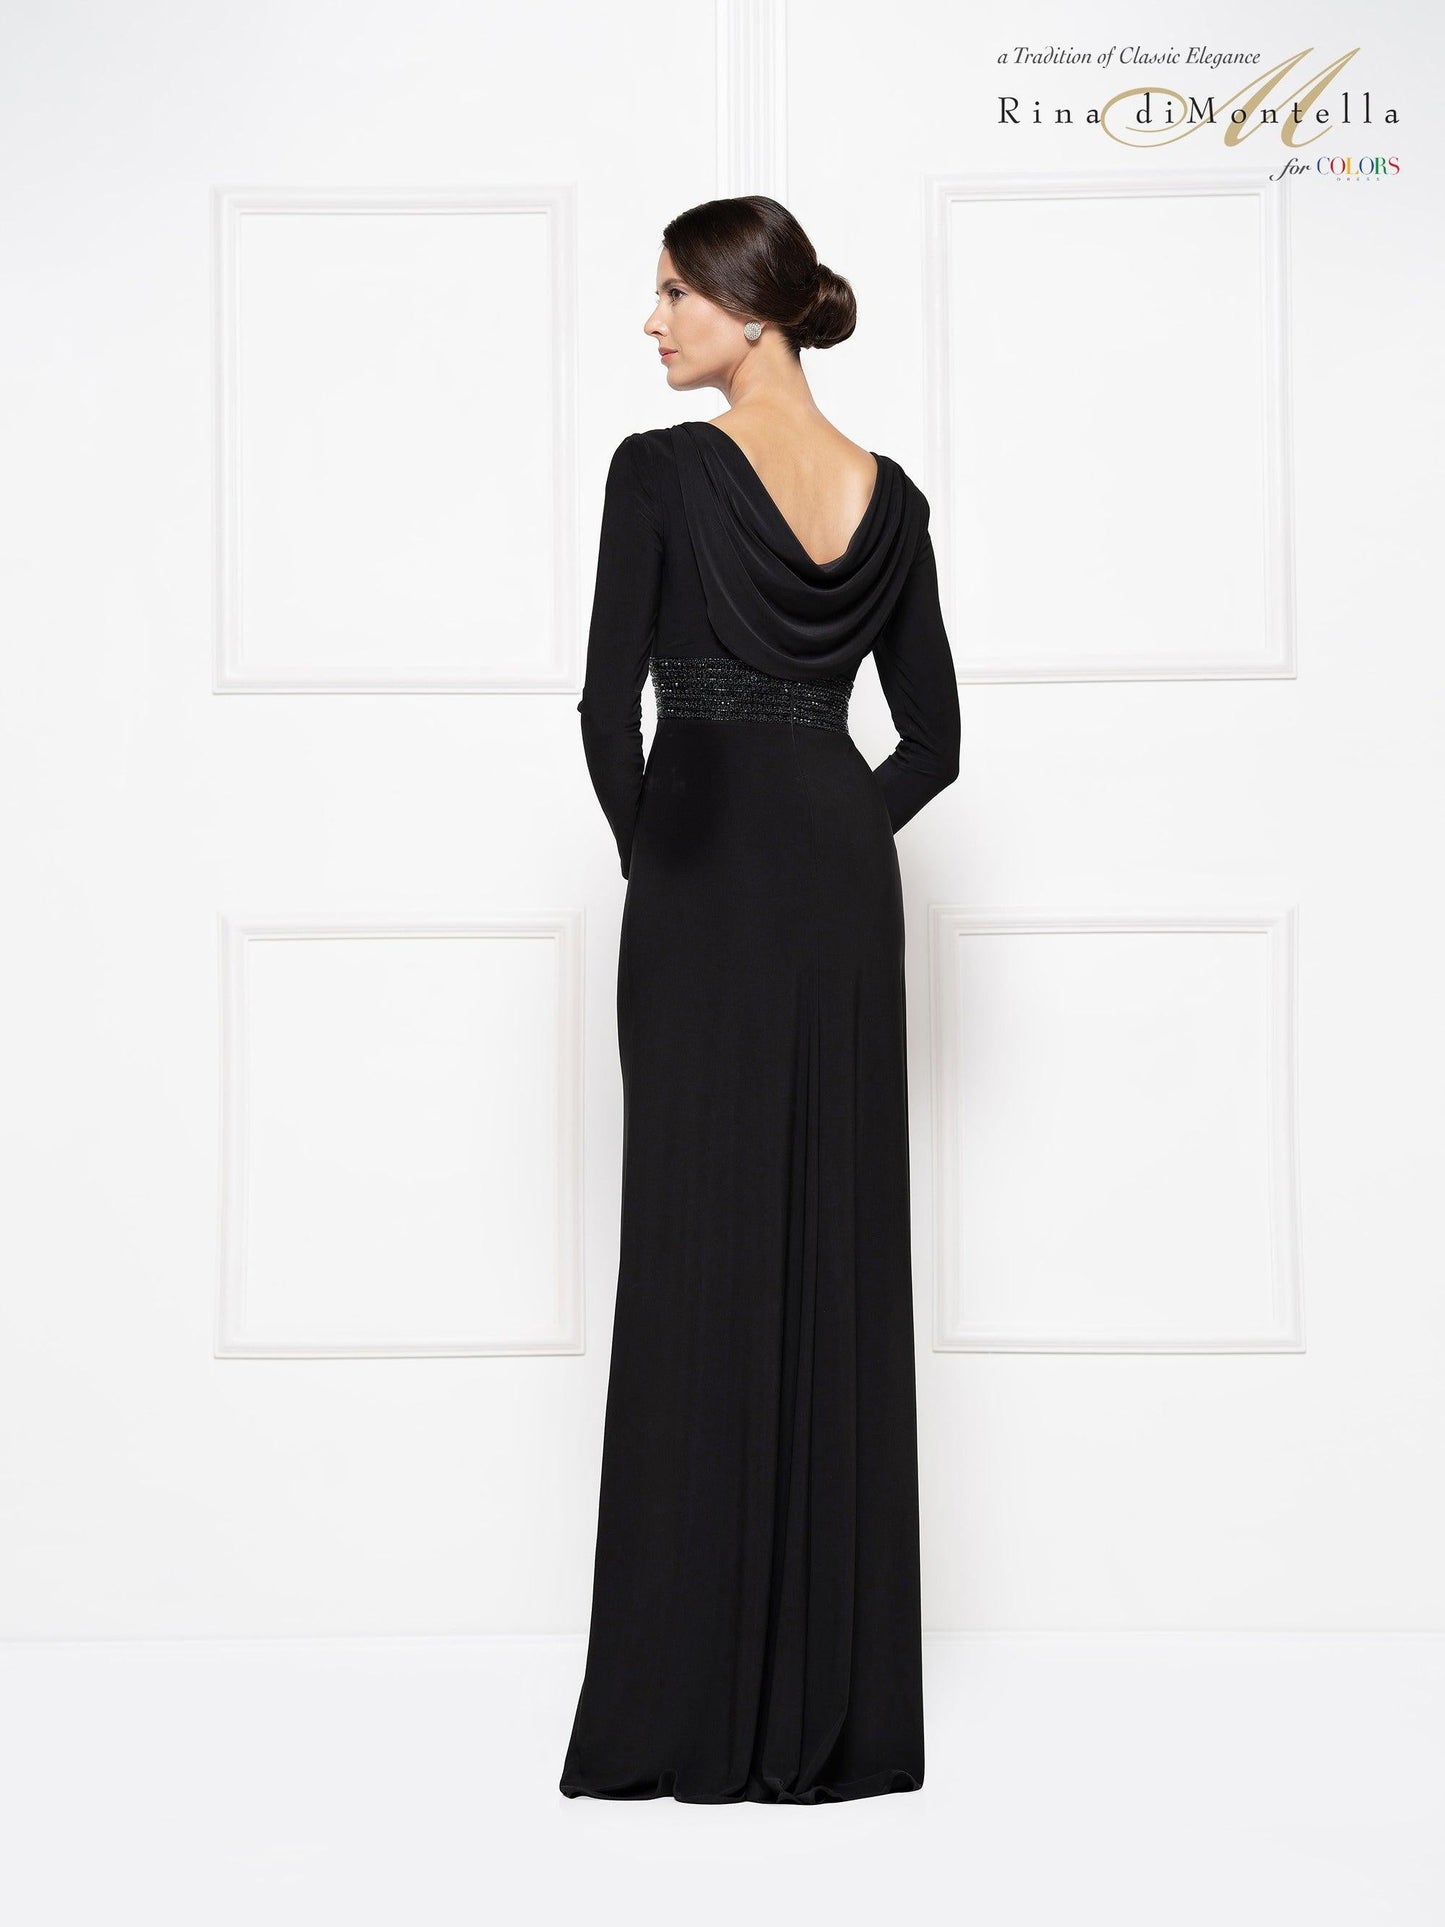 Rina di Montella Formal Long Sleeve Dress 2691 - The Dress Outlet